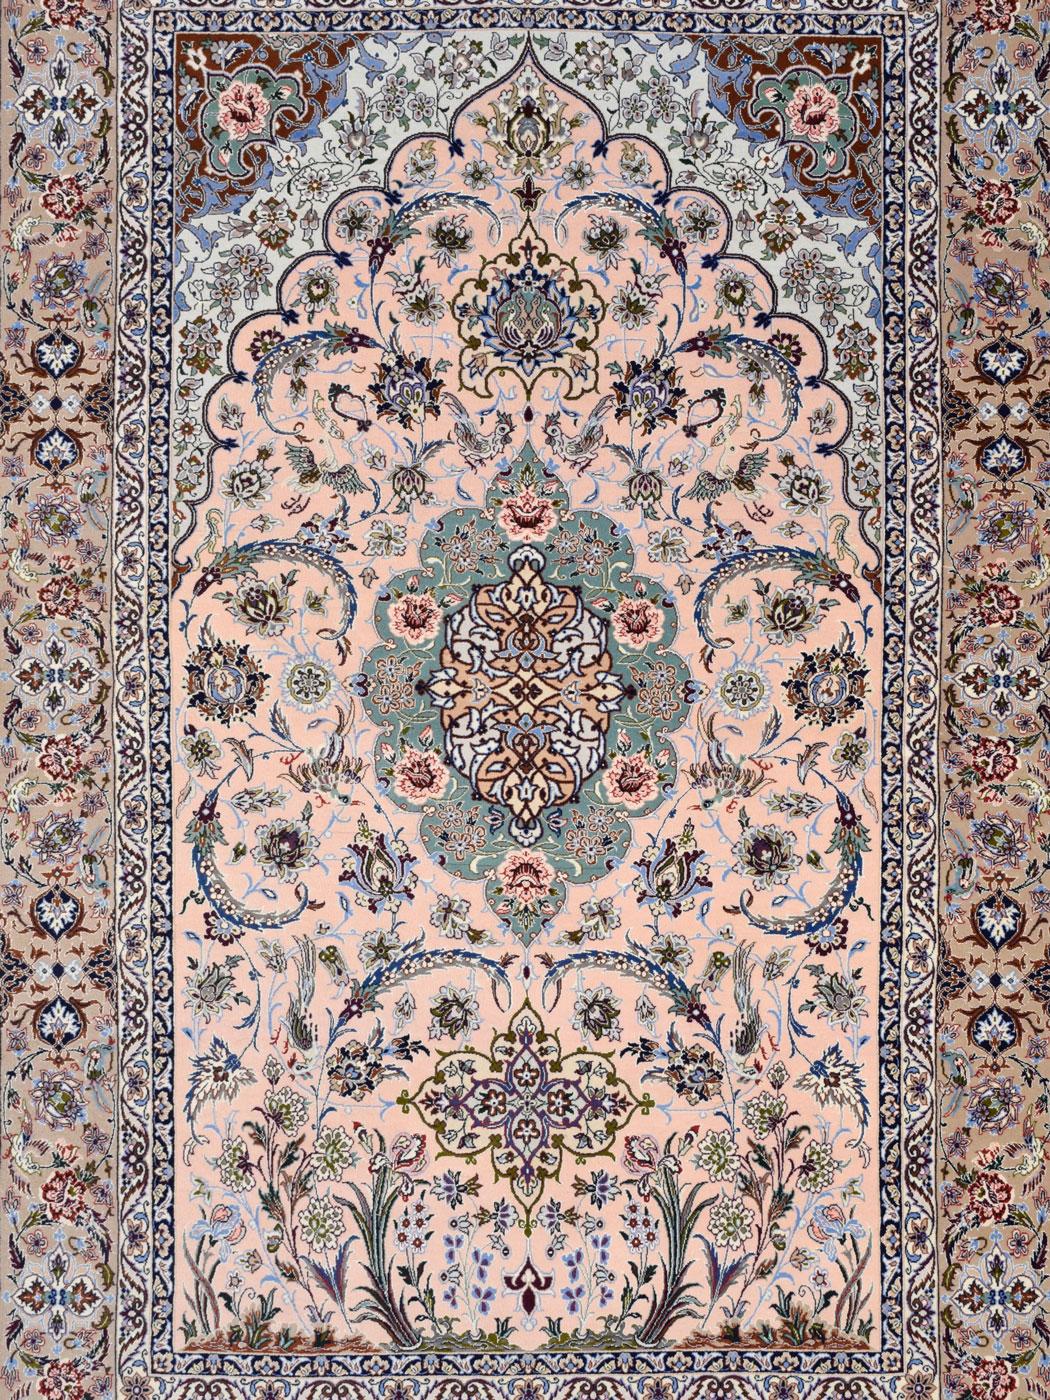 Indulge in the timeless elegance of this Persian Tabriz 5' x 7' area rug, a masterpiece of craftsmanship and artistry in pink, teal, red, and blue. Skillfully hand knotted, this rug's captivating color palette is derived from all-natural and organic